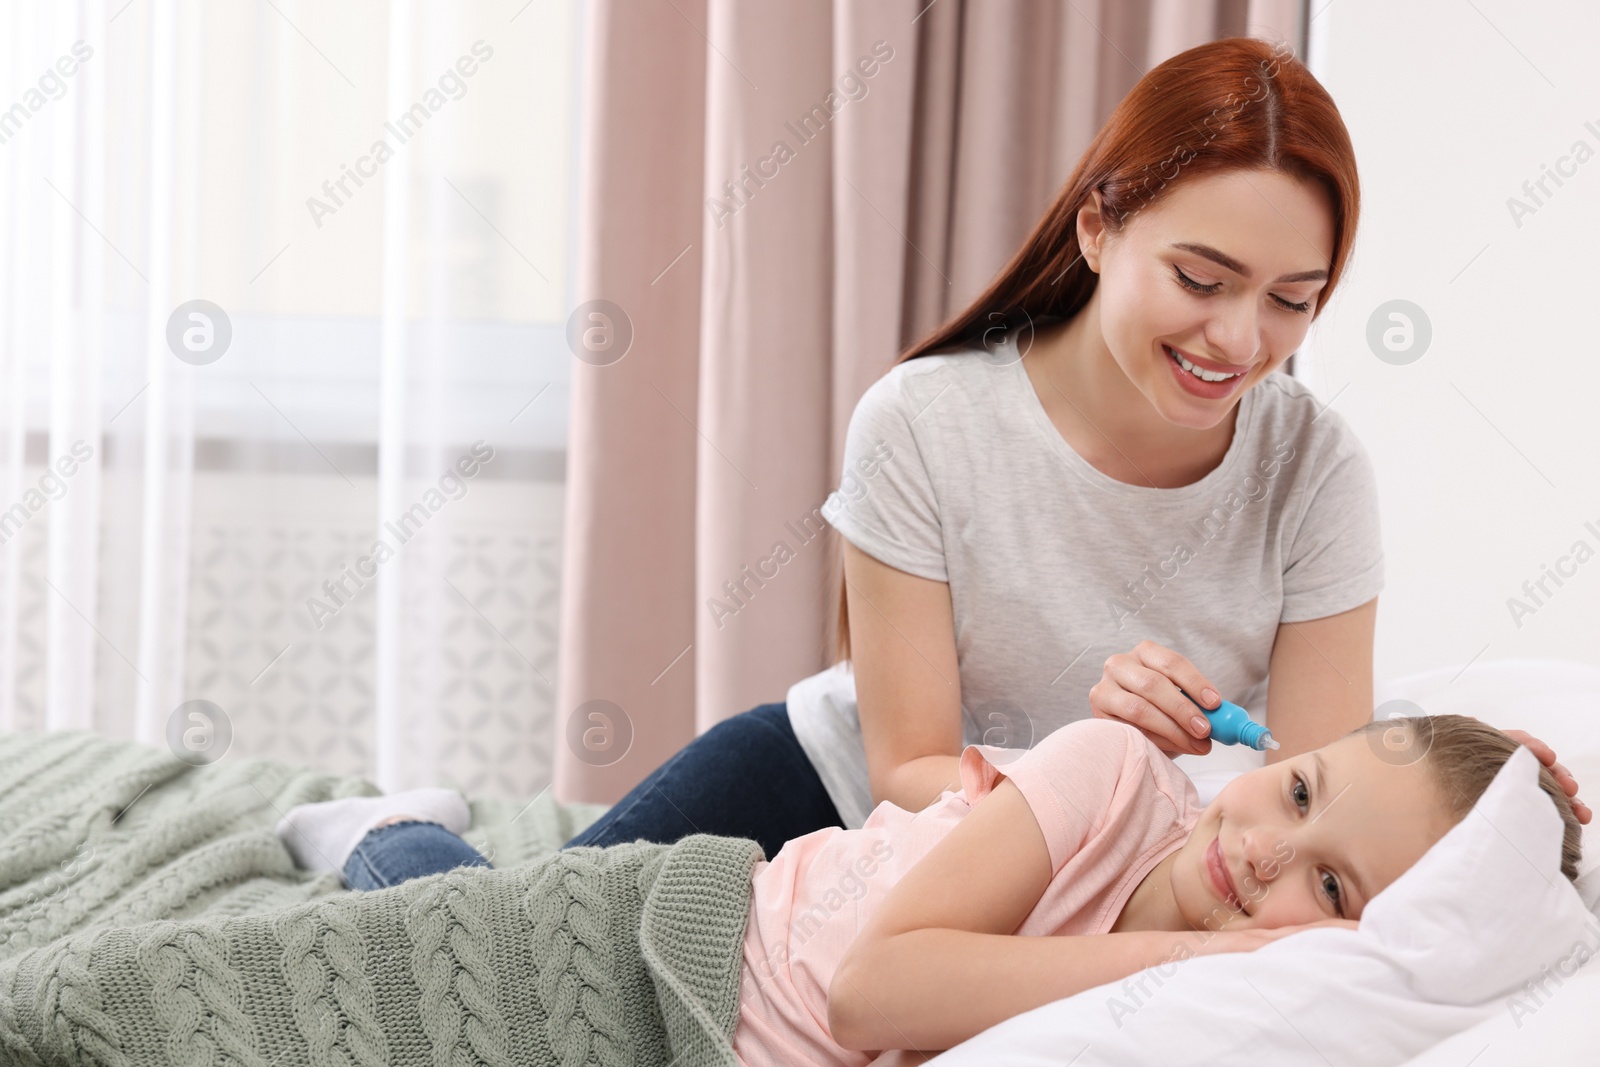 Photo of Mother dripping medication into daughter's ear in bedroom